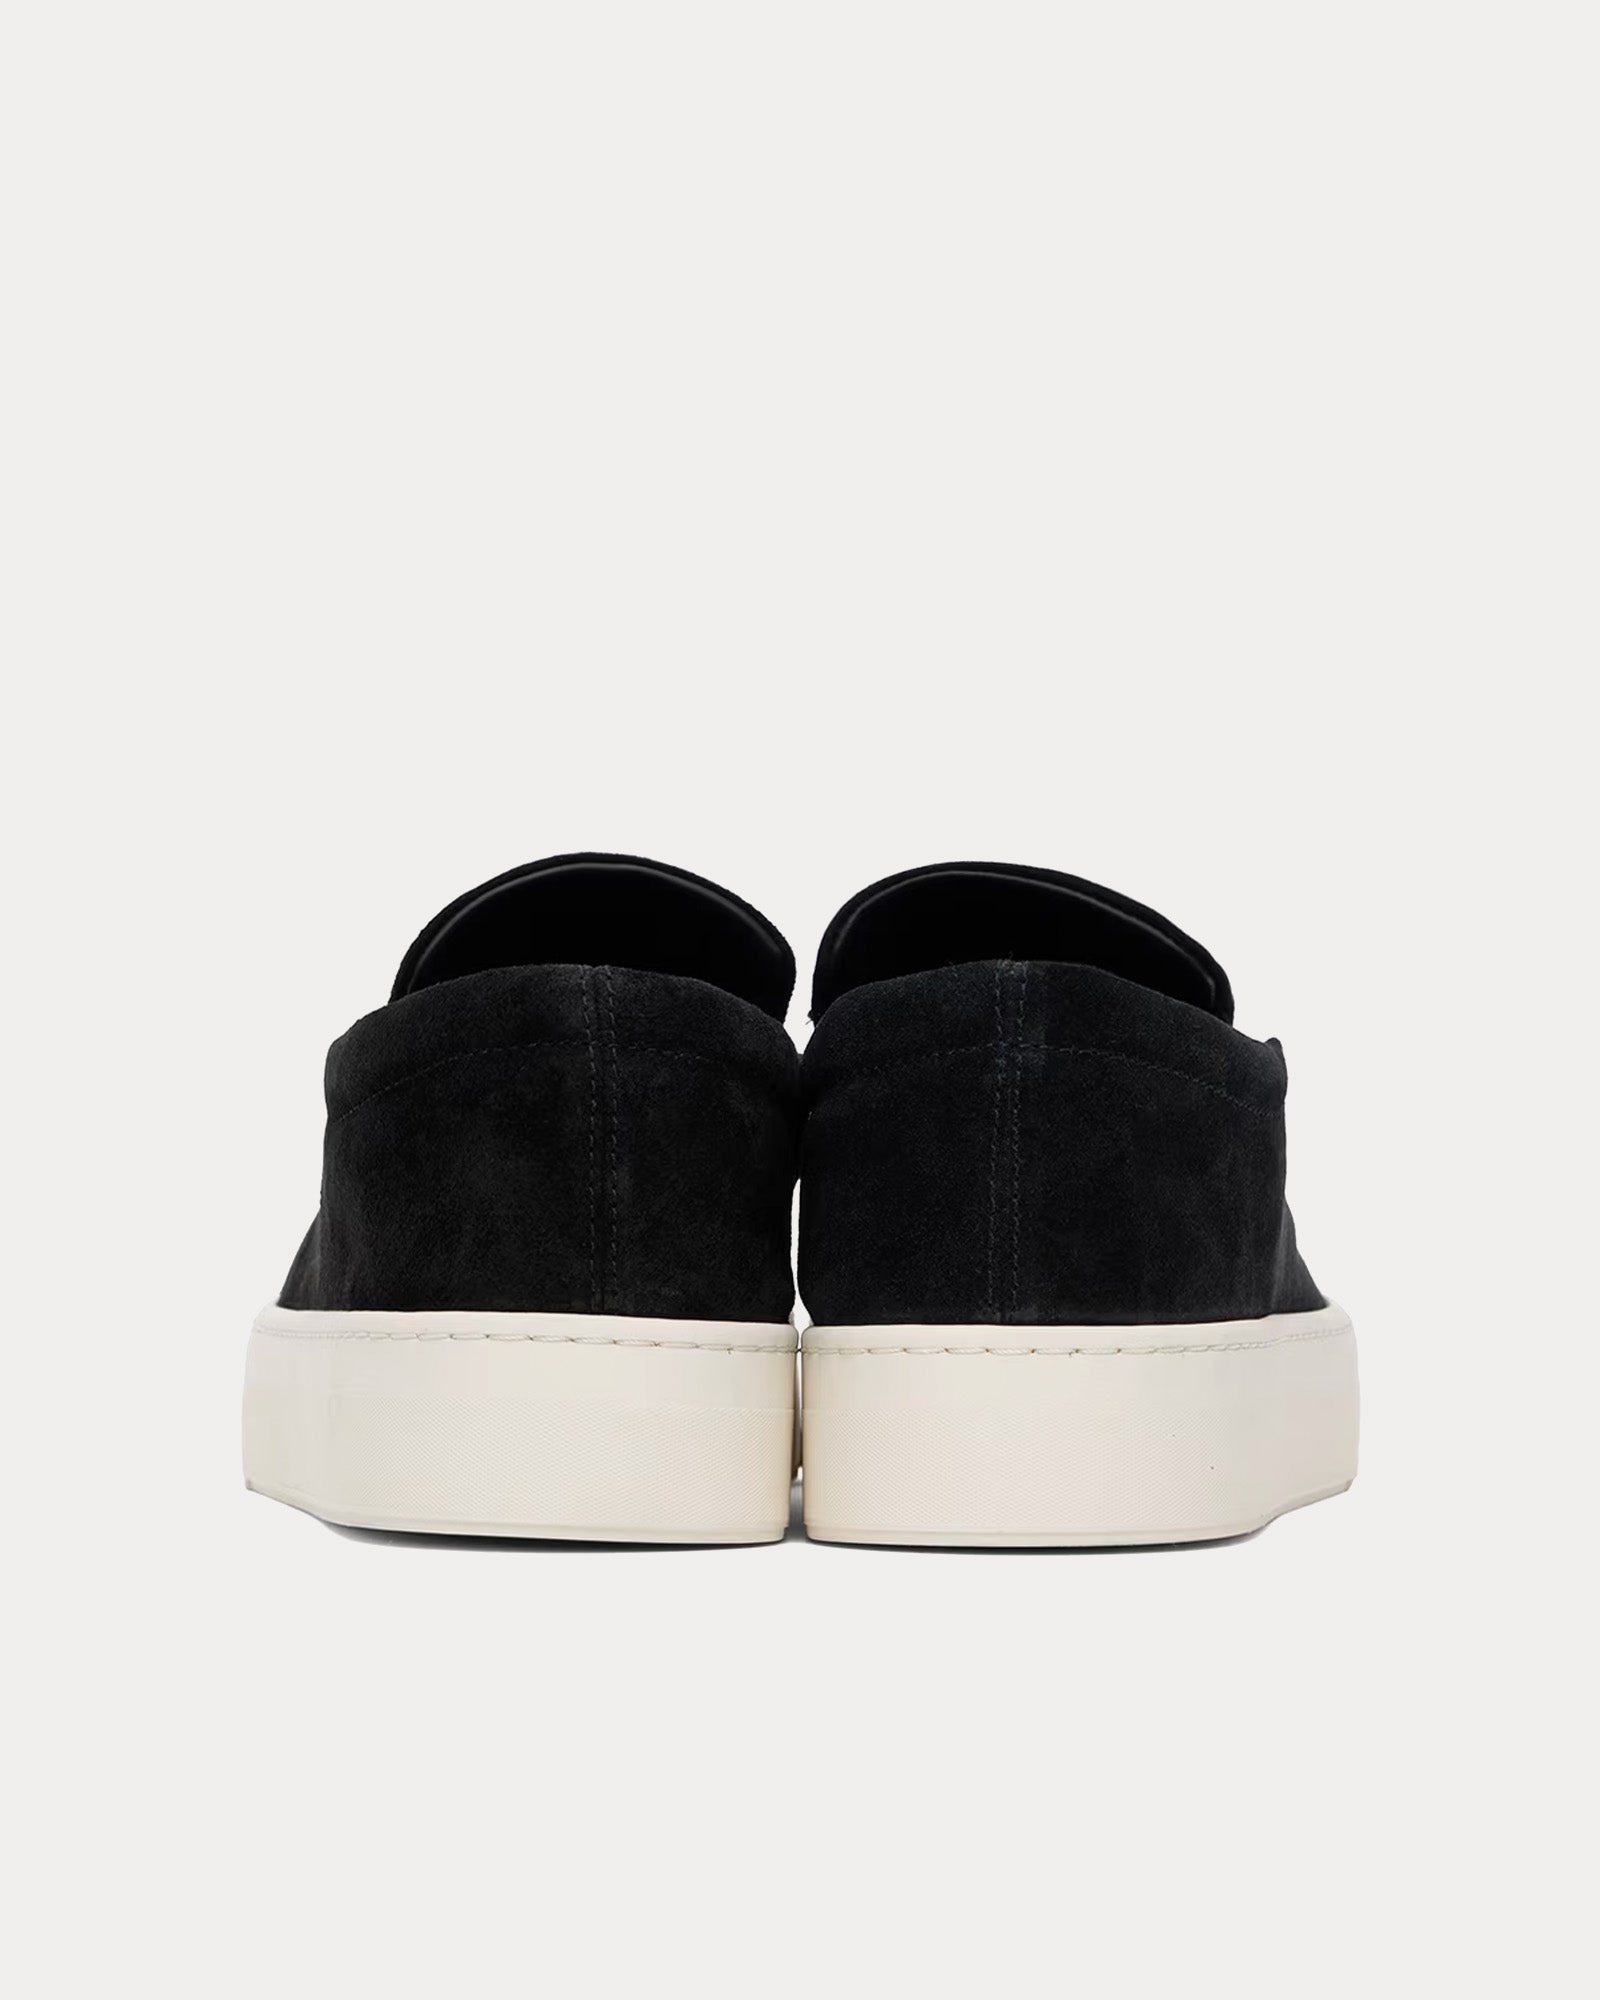 The Row - Dean Suede Black / White Slip On Sneakers